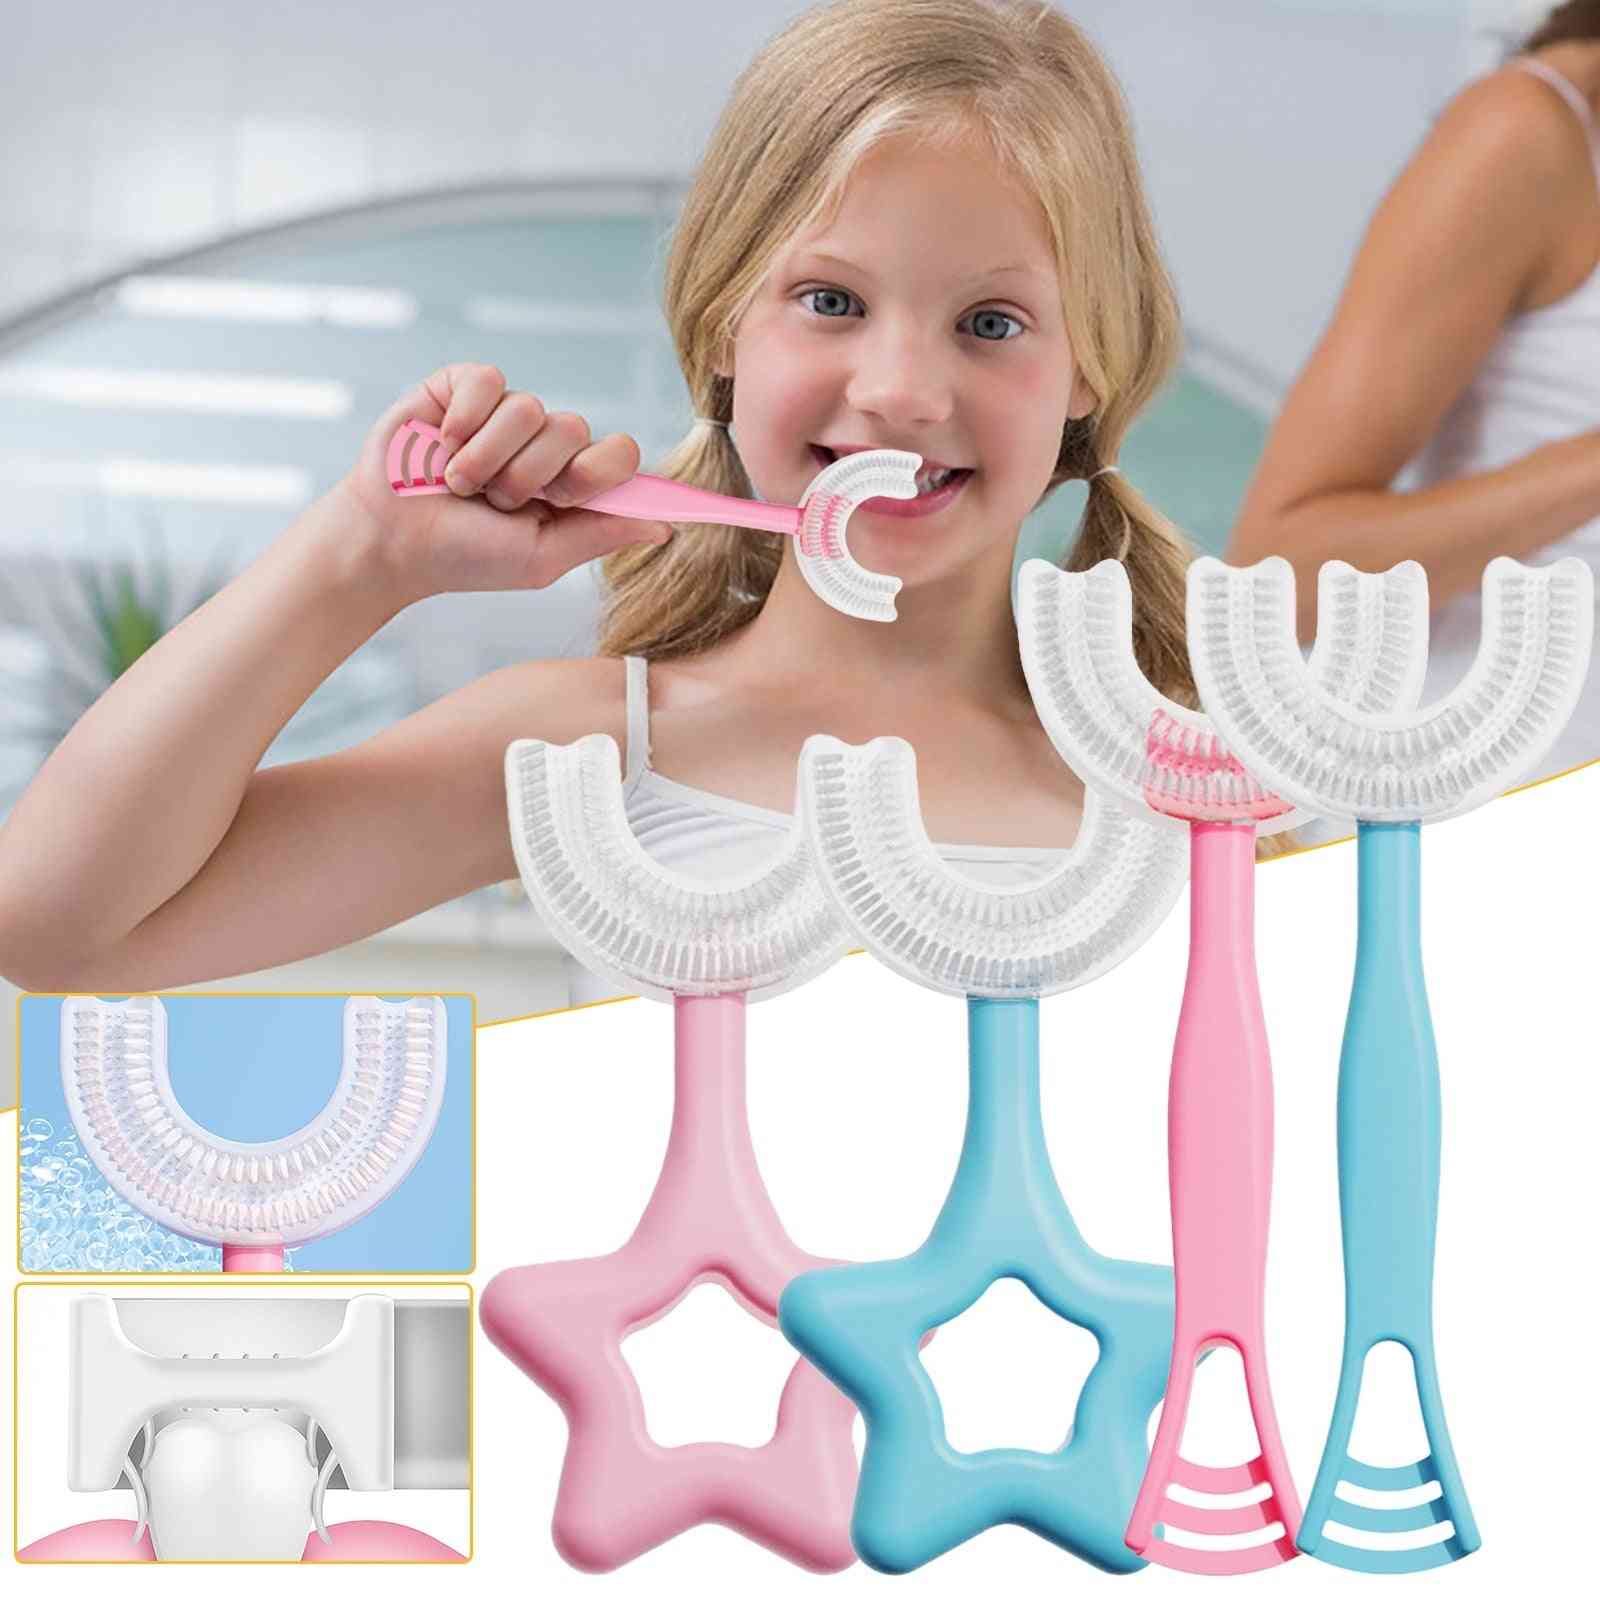 Children's U-shape Toothbrush 360° Cleansing Baby Soft Infant Tooth Teeth Clean Brush Babies Oral Health Care Kids Toothbrush